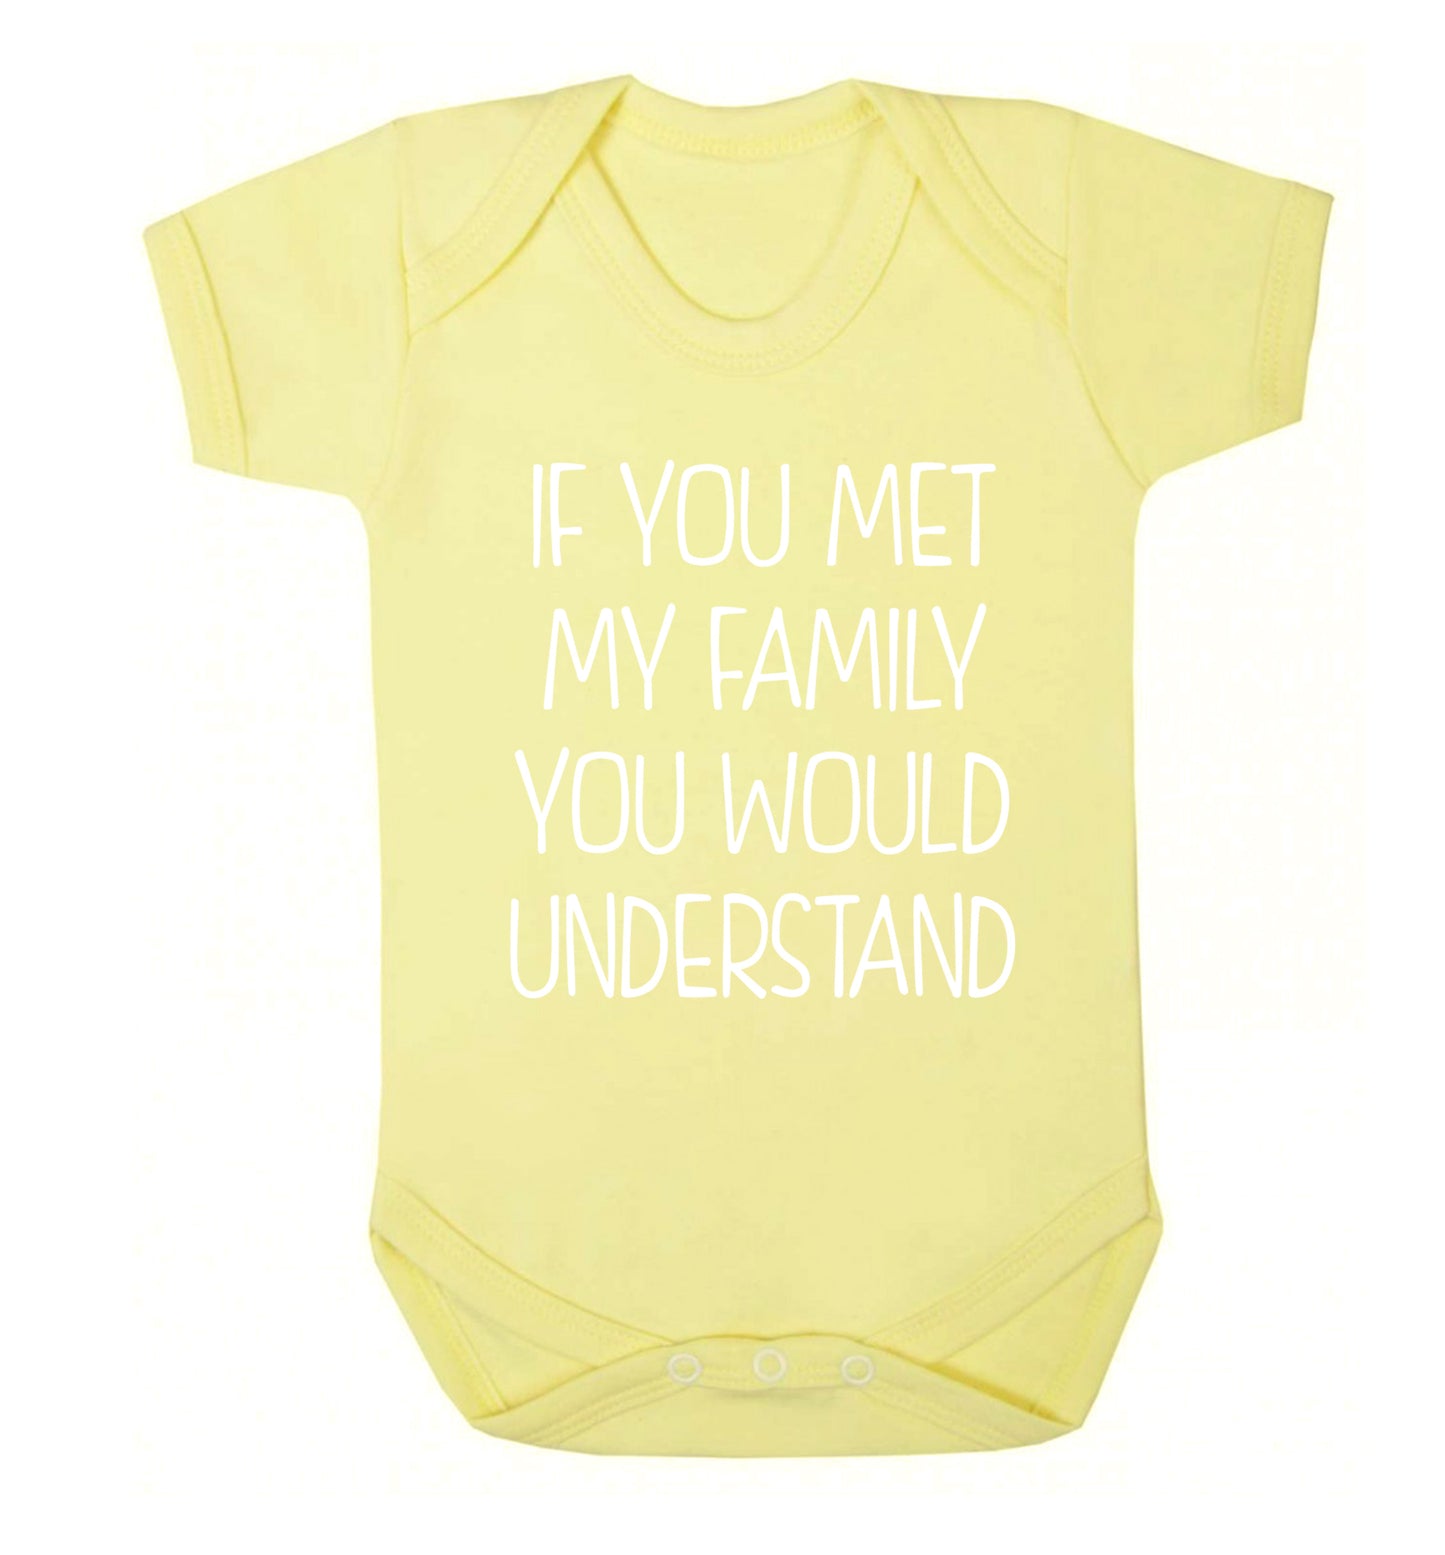 If you met my family you would understand Baby Vest pale yellow 18-24 months